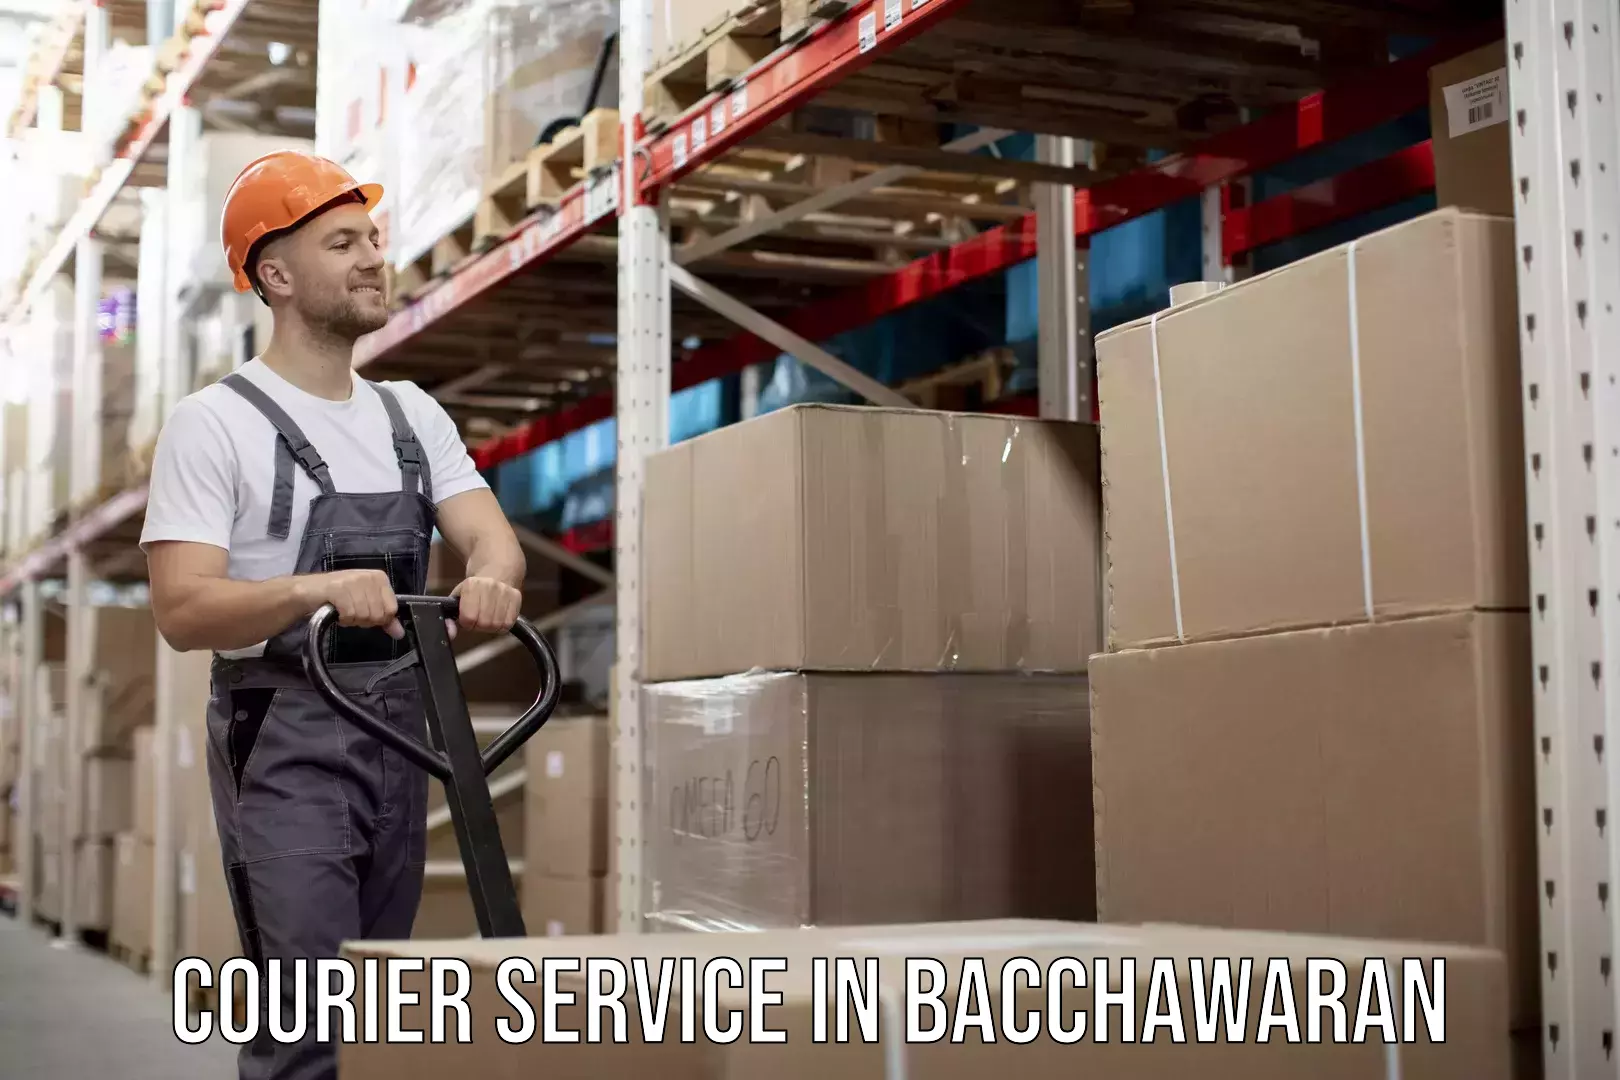 Parcel handling and care in Bacchawaran